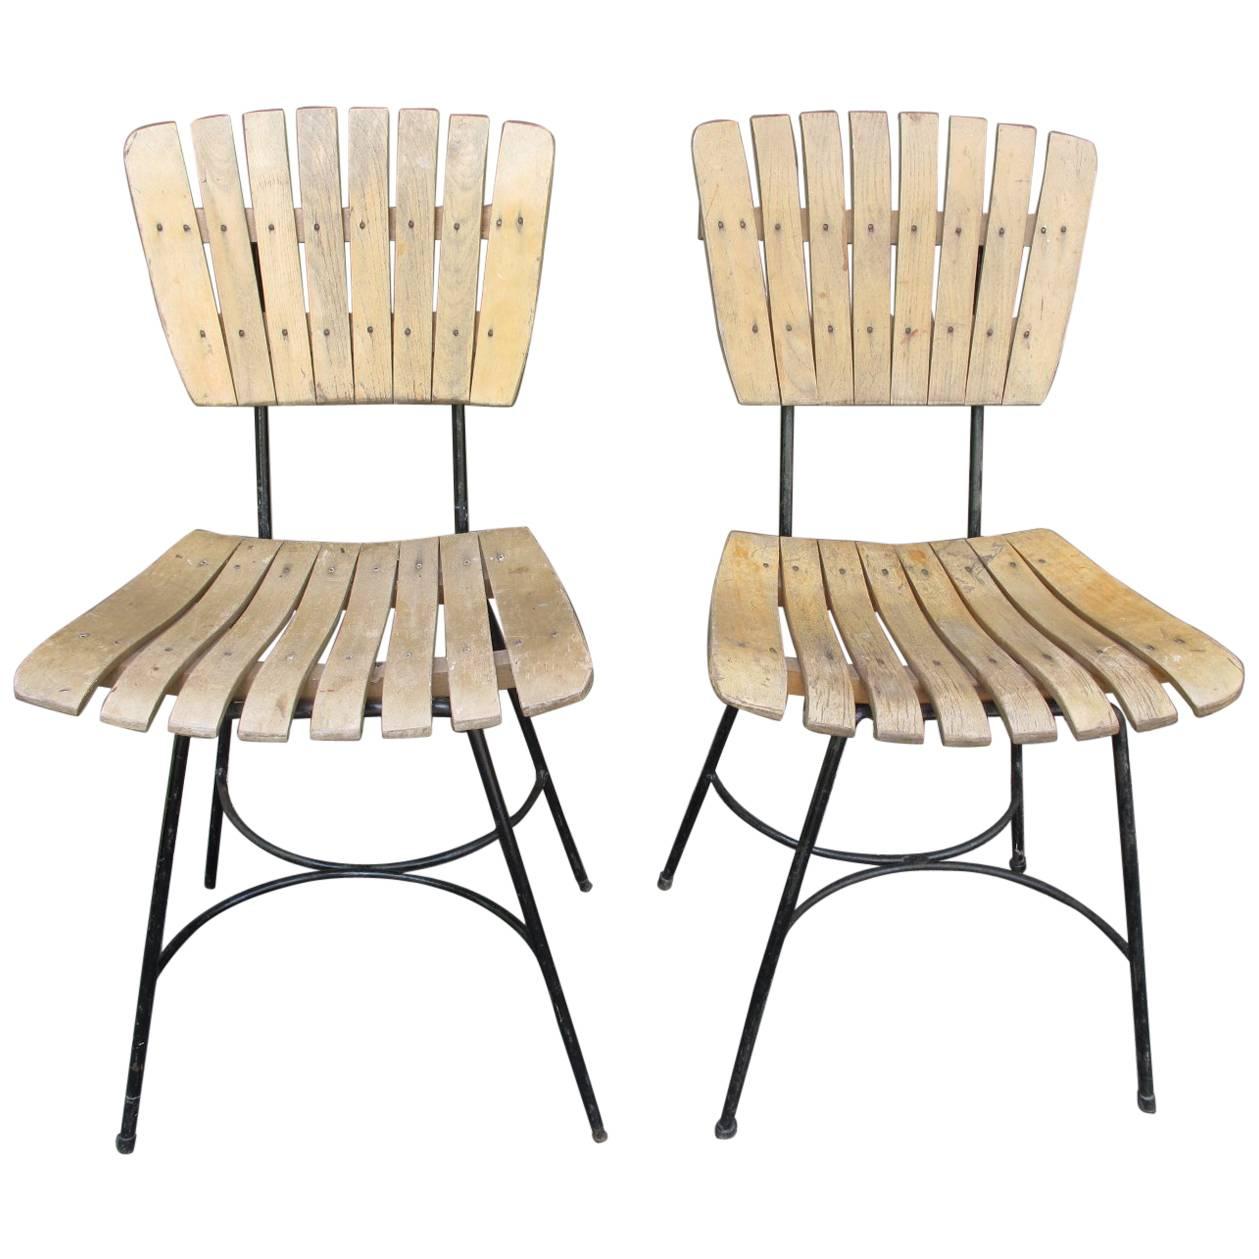 Pair of Slat Chairs in the Style of Arthur Umanoff